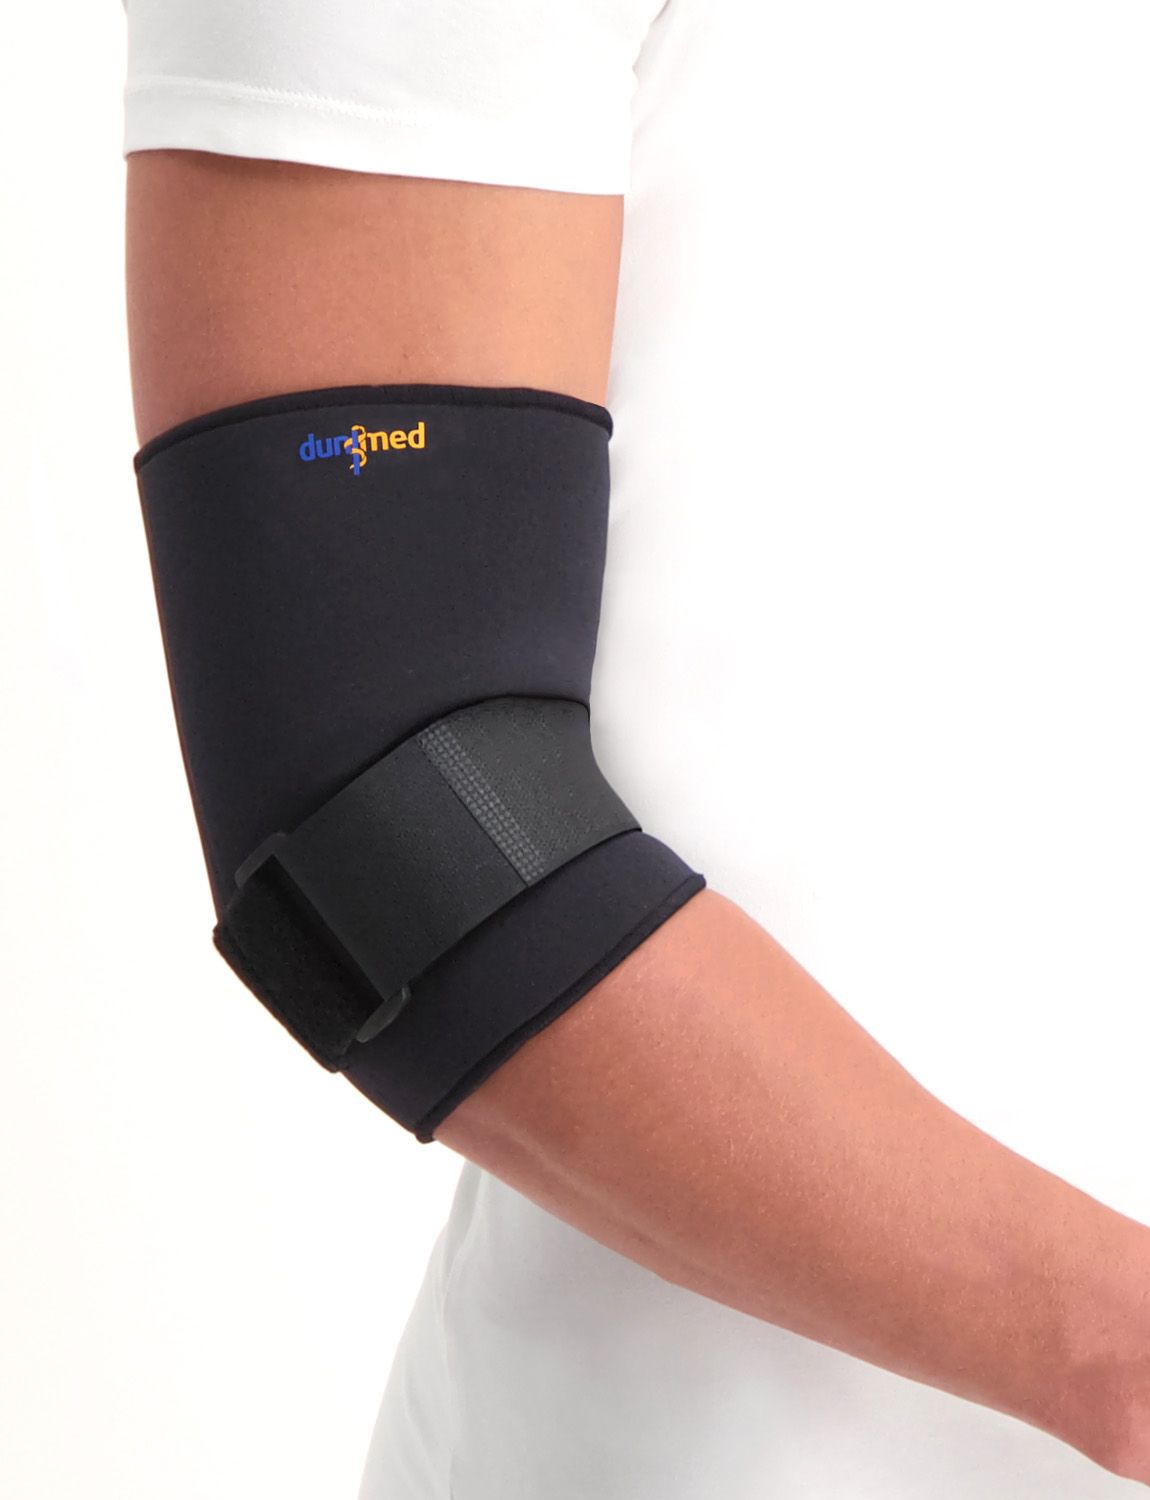 Dunimed elbow support for sale